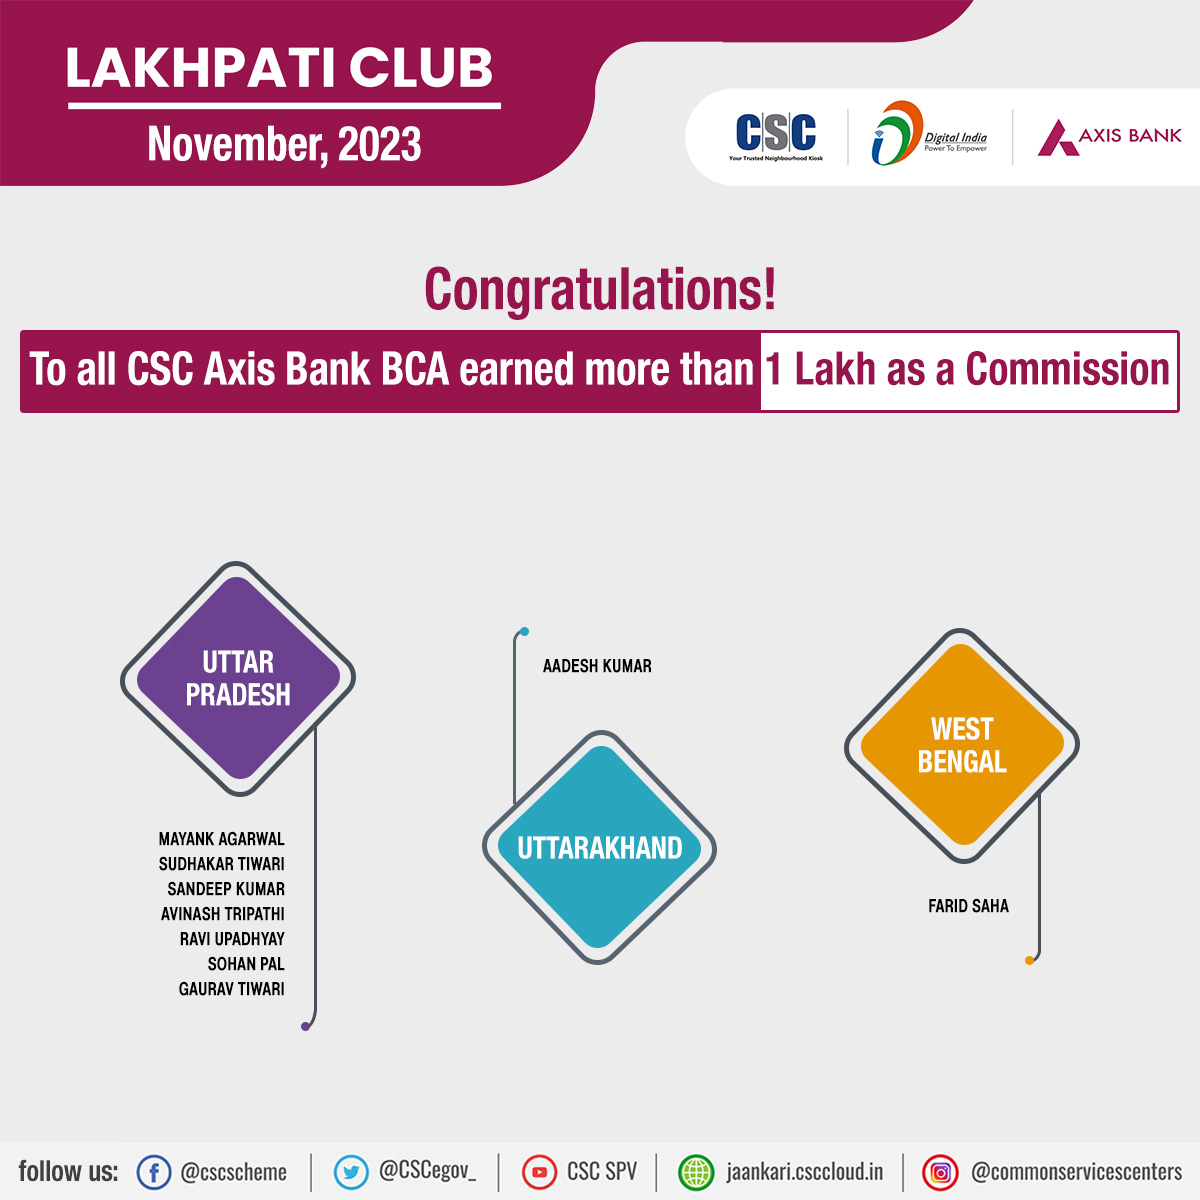 CSC Axis Bank LAKHPATI CLUB 104 BCA LIST- 2 Nov'23! Congratulations🎉 to all CSC Axis Bank BCA who have earned more than 1 Lakh commission. Wish you all the best in your future endeavours.👏 #cscfinancialservices #csc #digitalindia #axisbank #axisbanklakhpaticlub